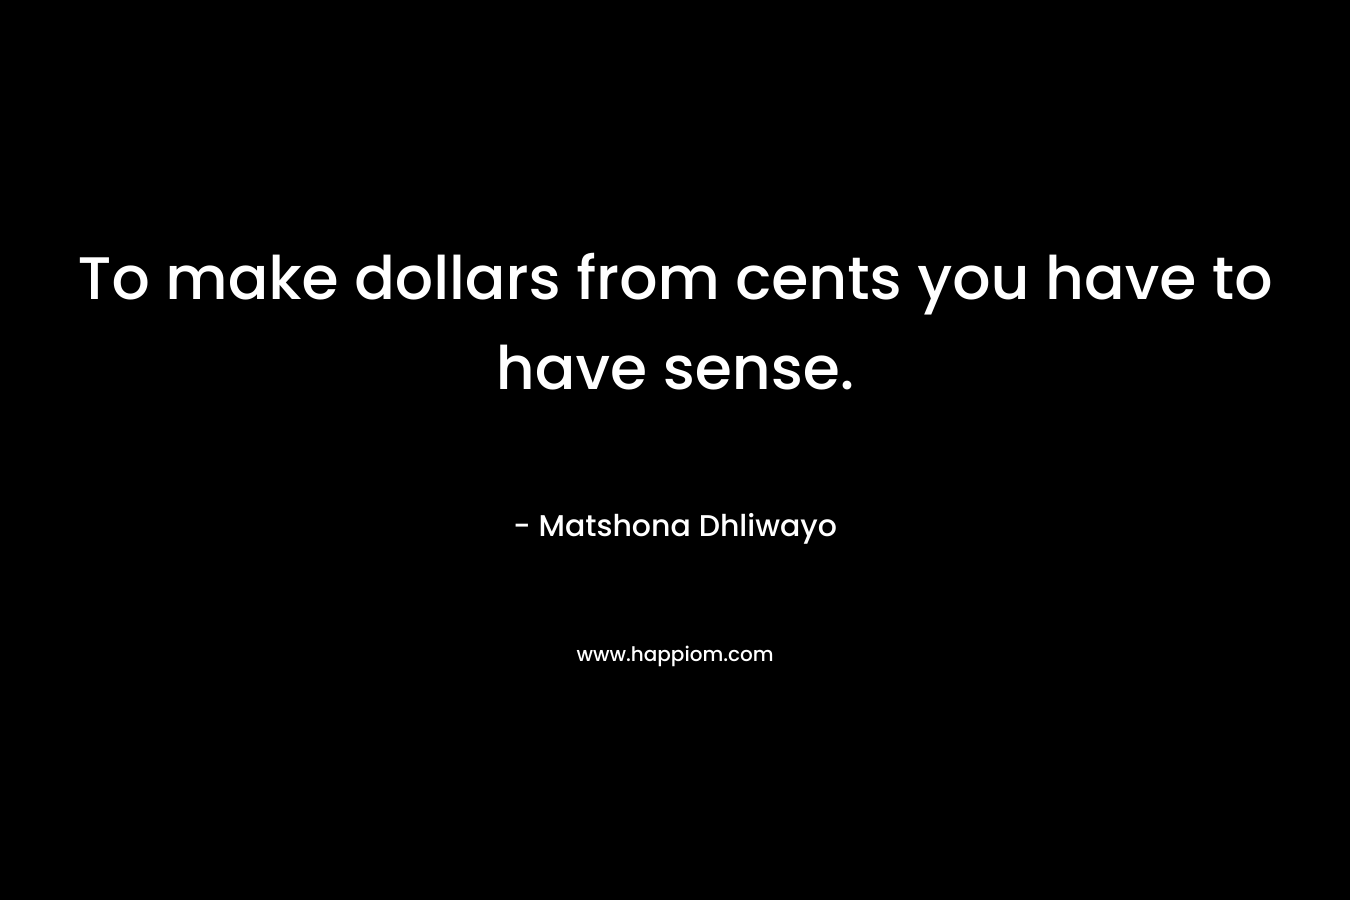 To make dollars from cents you have to have sense. – Matshona Dhliwayo